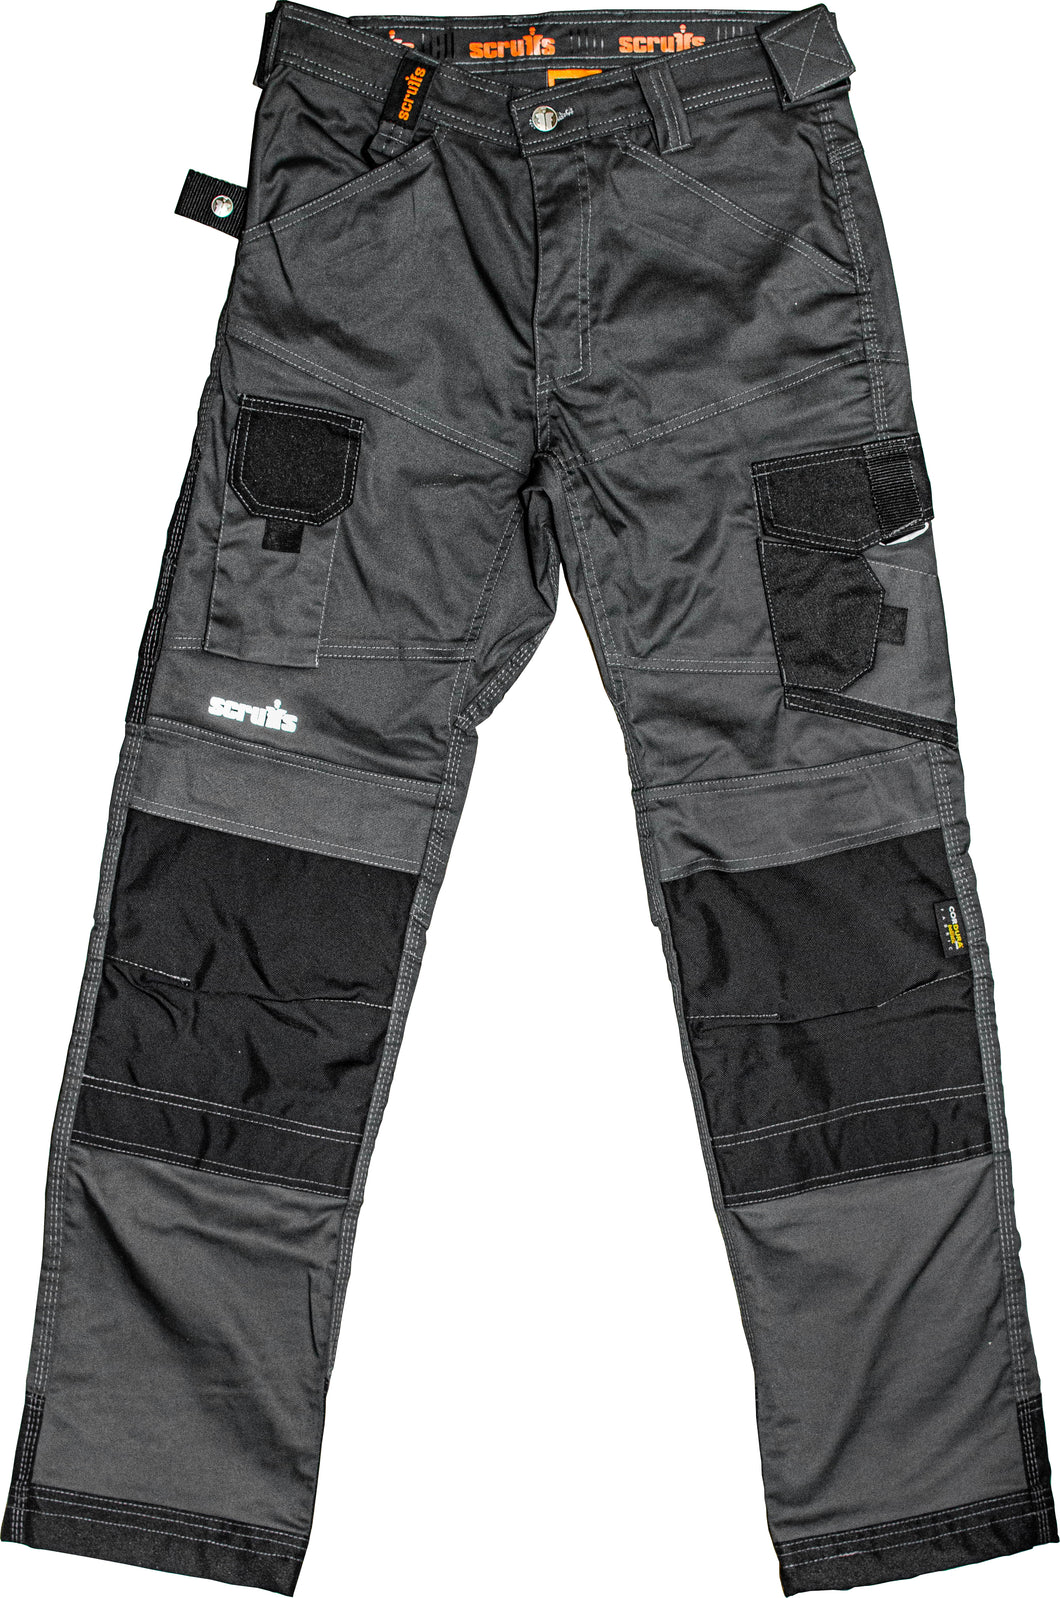 SCRUFFS Pro-Flex Trousers - Graphite - Various Sizes Available